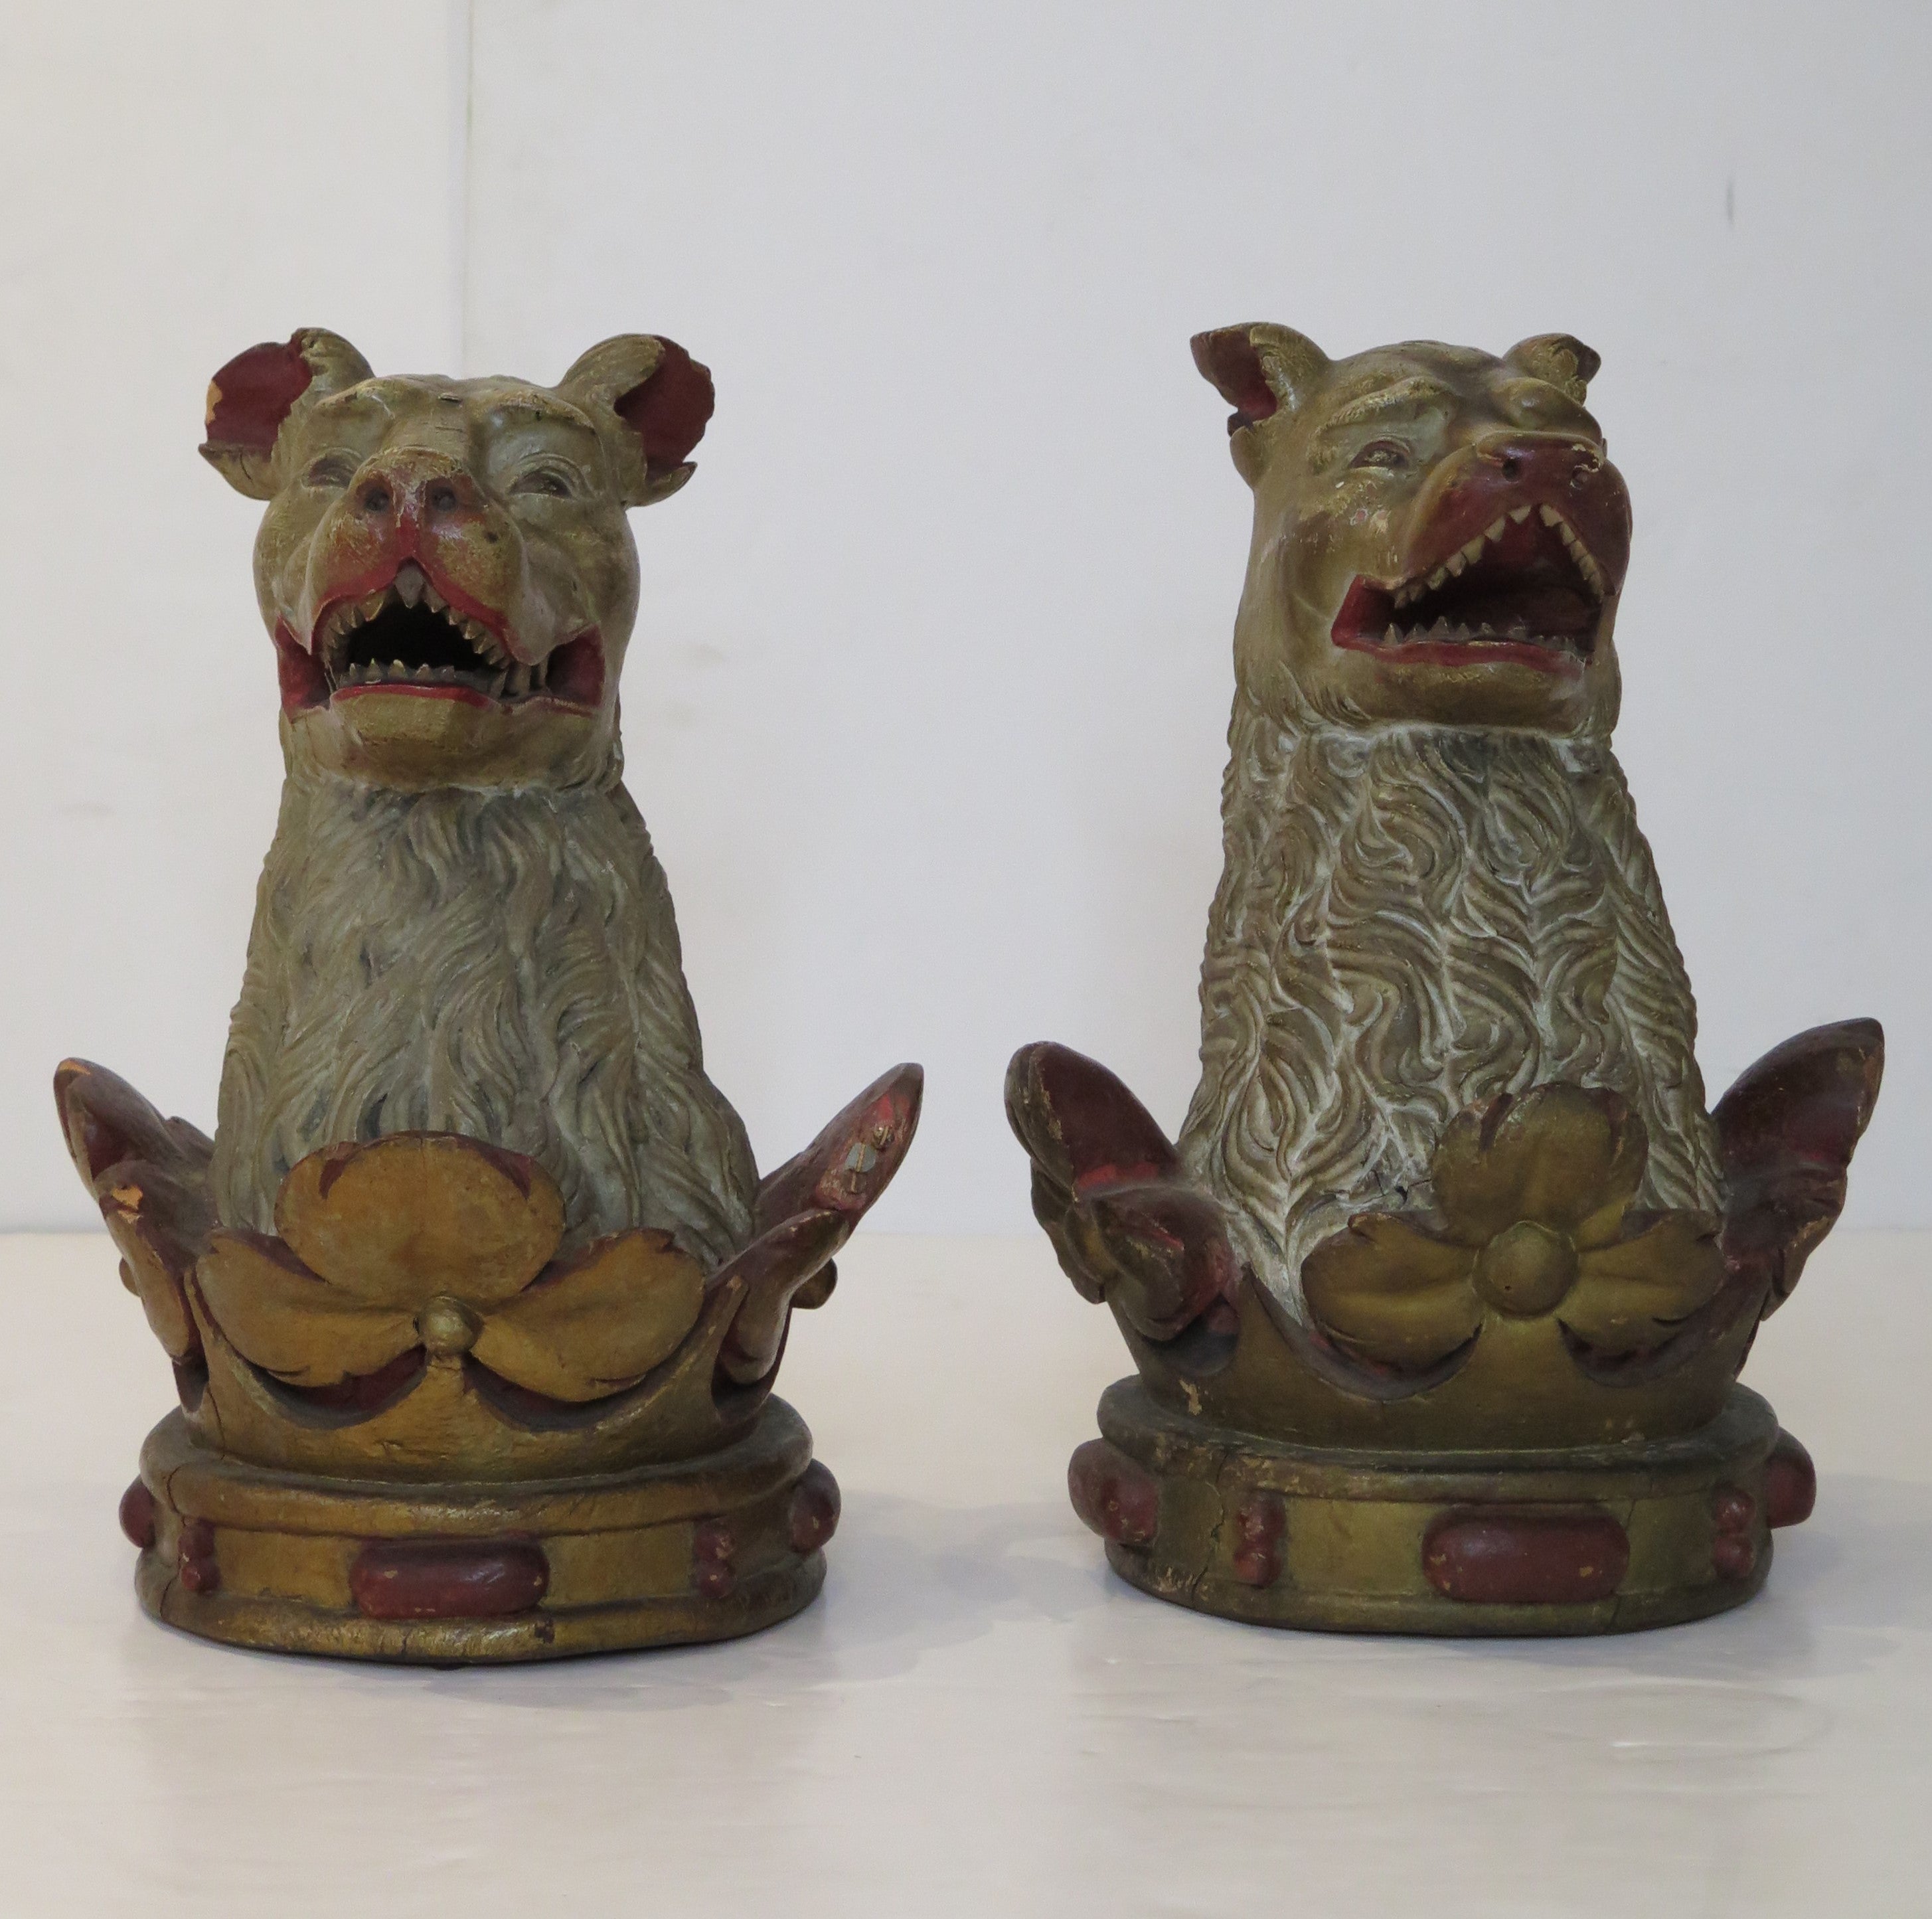 Carved Wood Family Crests '' Out Of A Ducal Coronet, Or A Bear Head